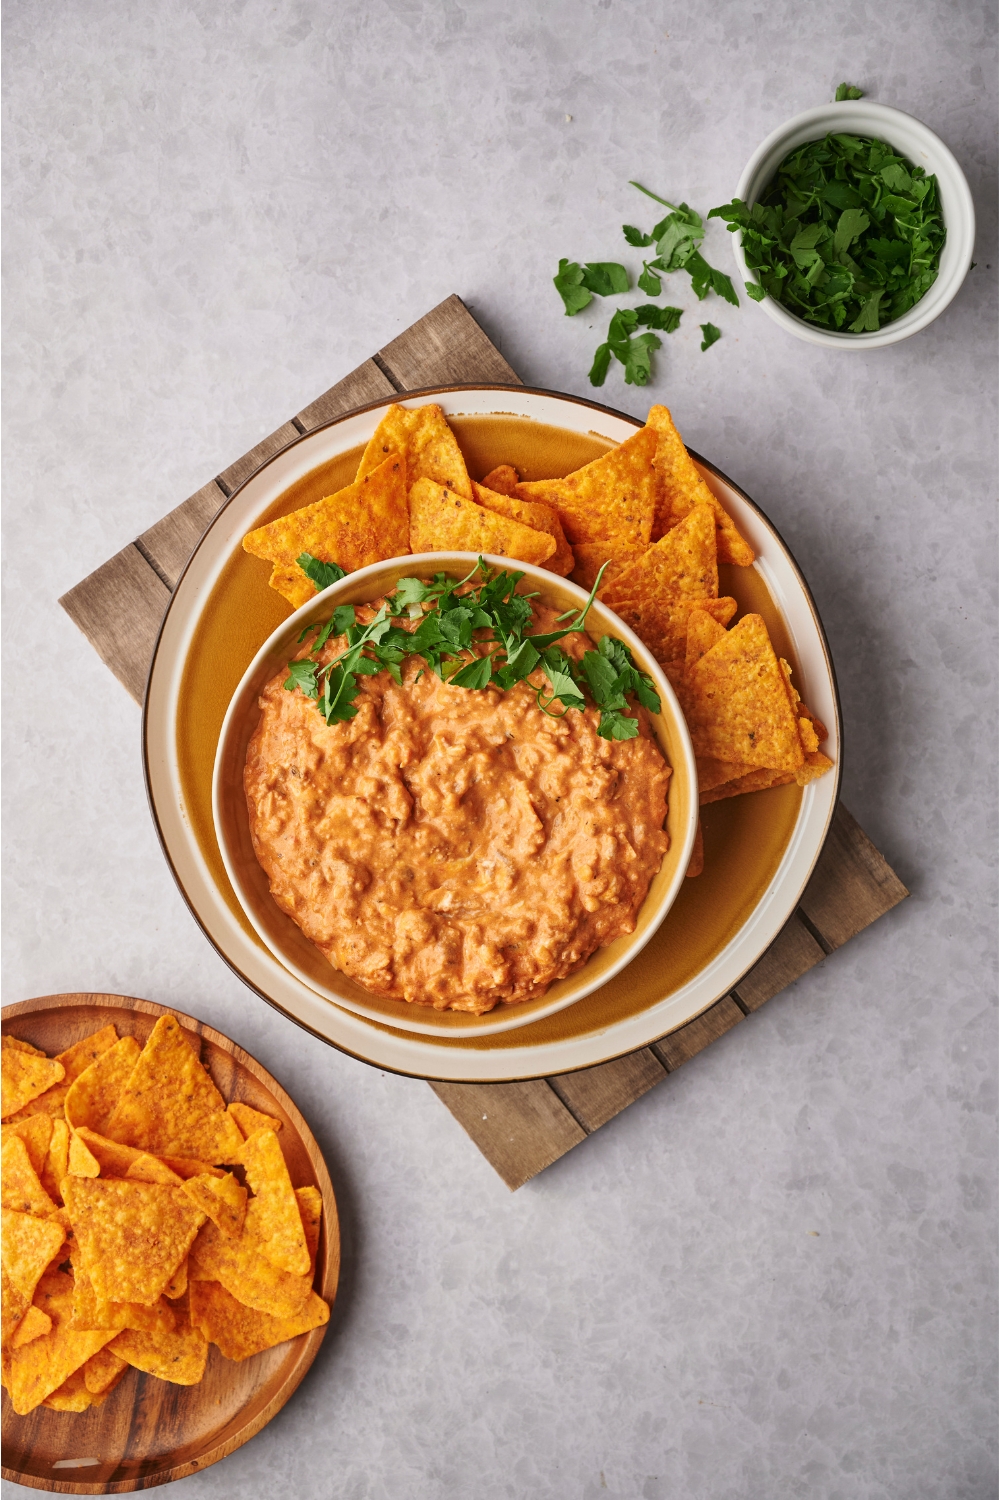 Chili cheese dip in a serving bowl atop a plate layered with tortilla chips, next to a bowl of fresh herbs and a plate of more tortilla chips.